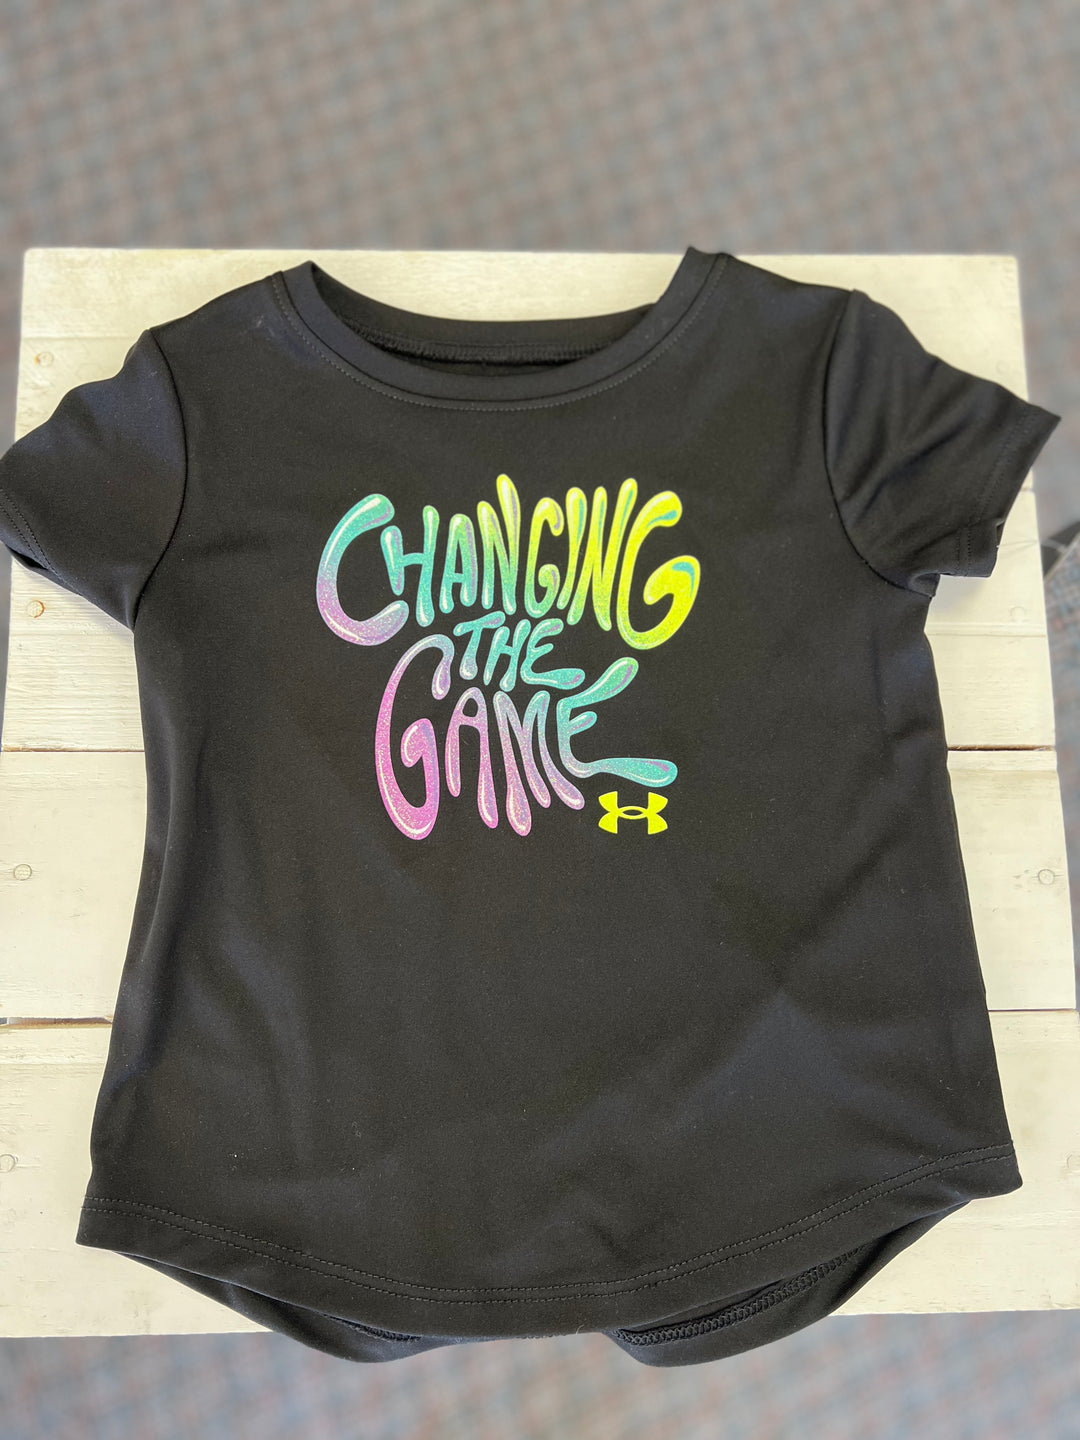 Girls "Changing the Game" Tee